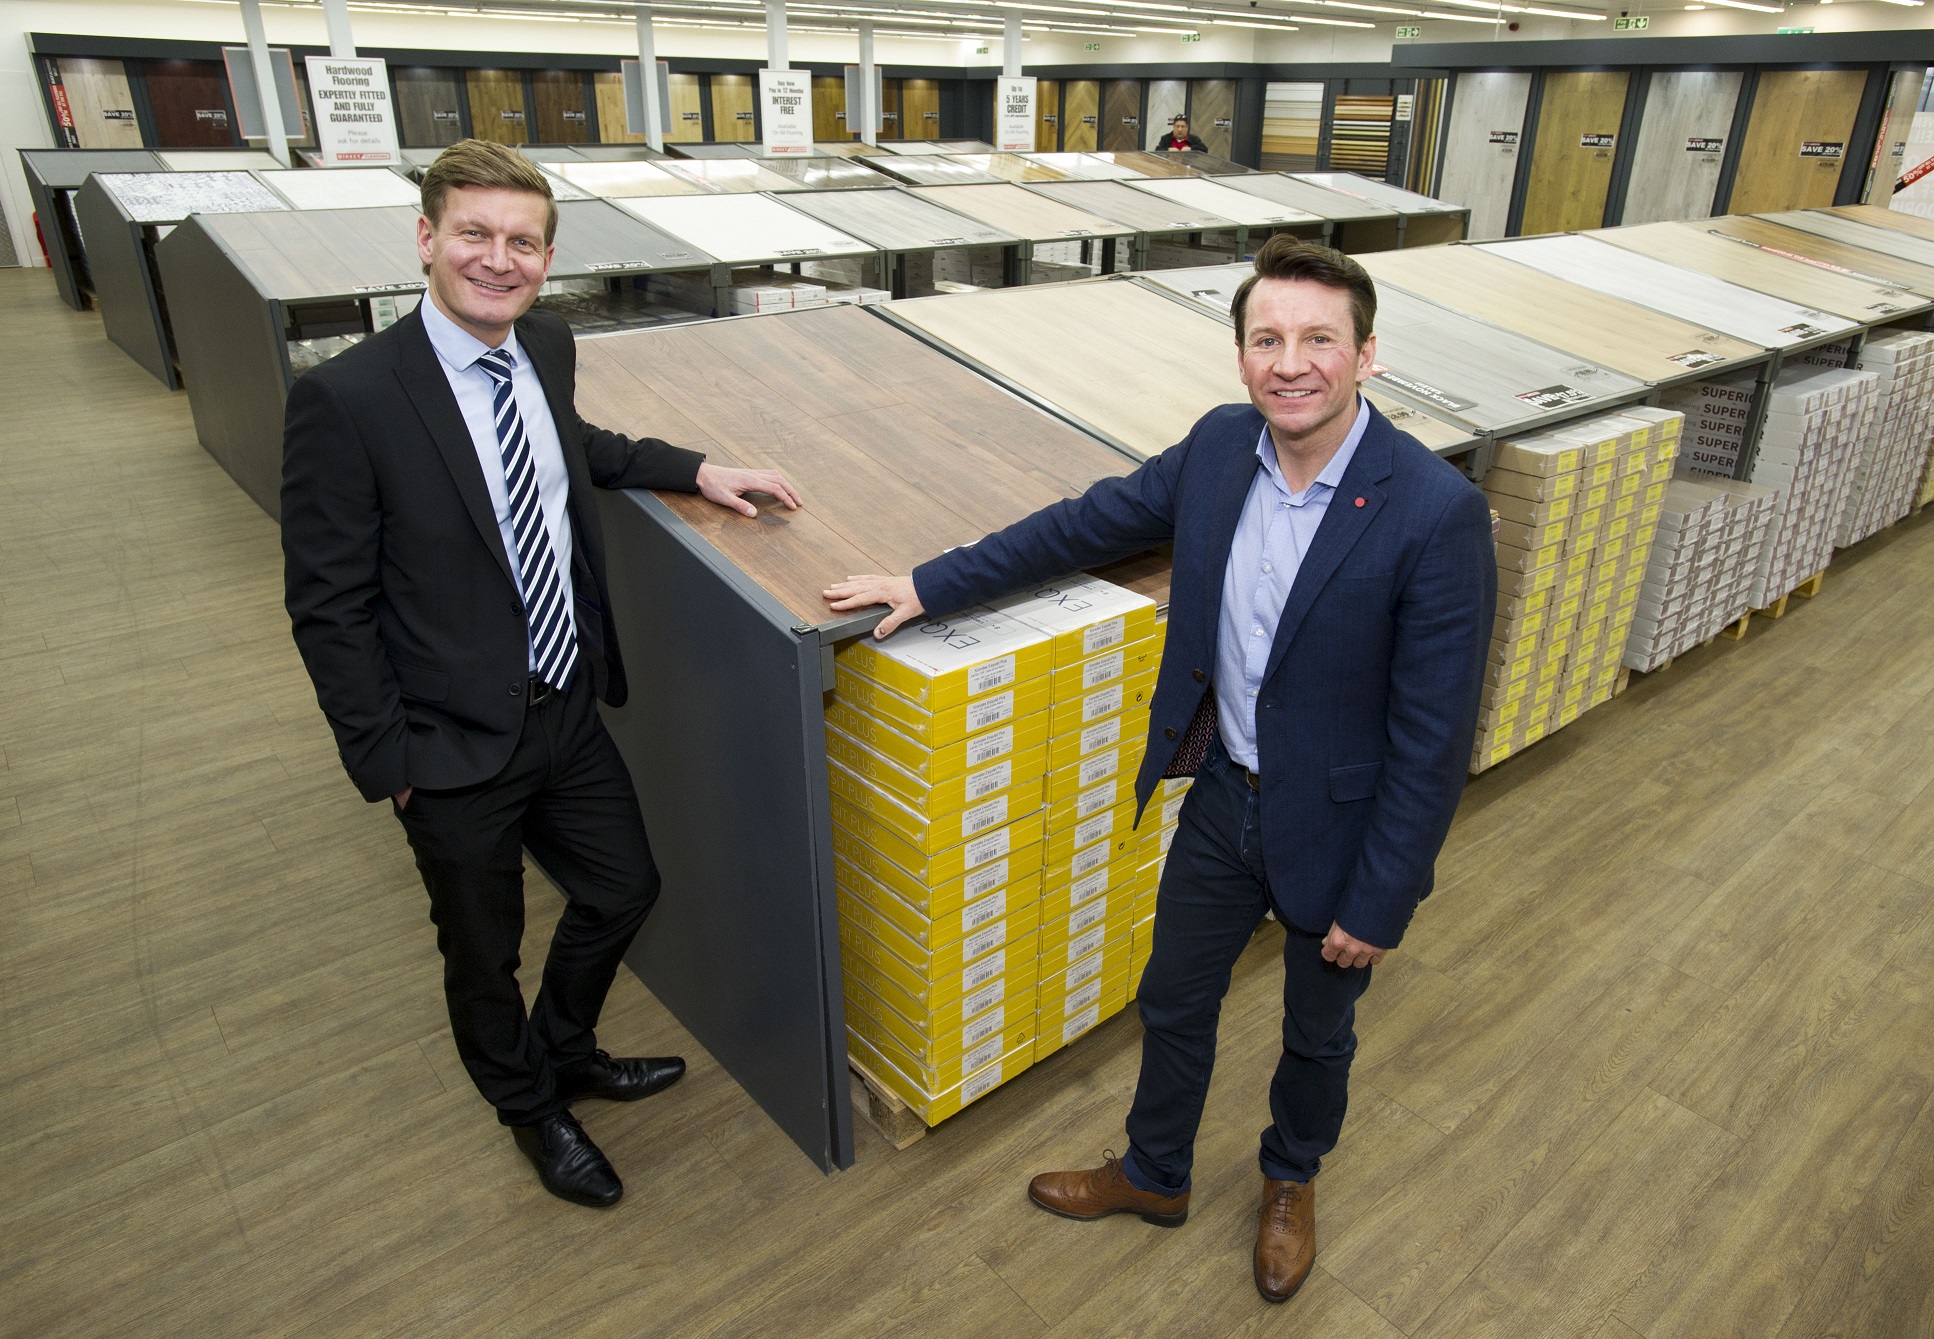 Direct Flooring receives £1.5m funding package from Bank of Scotland